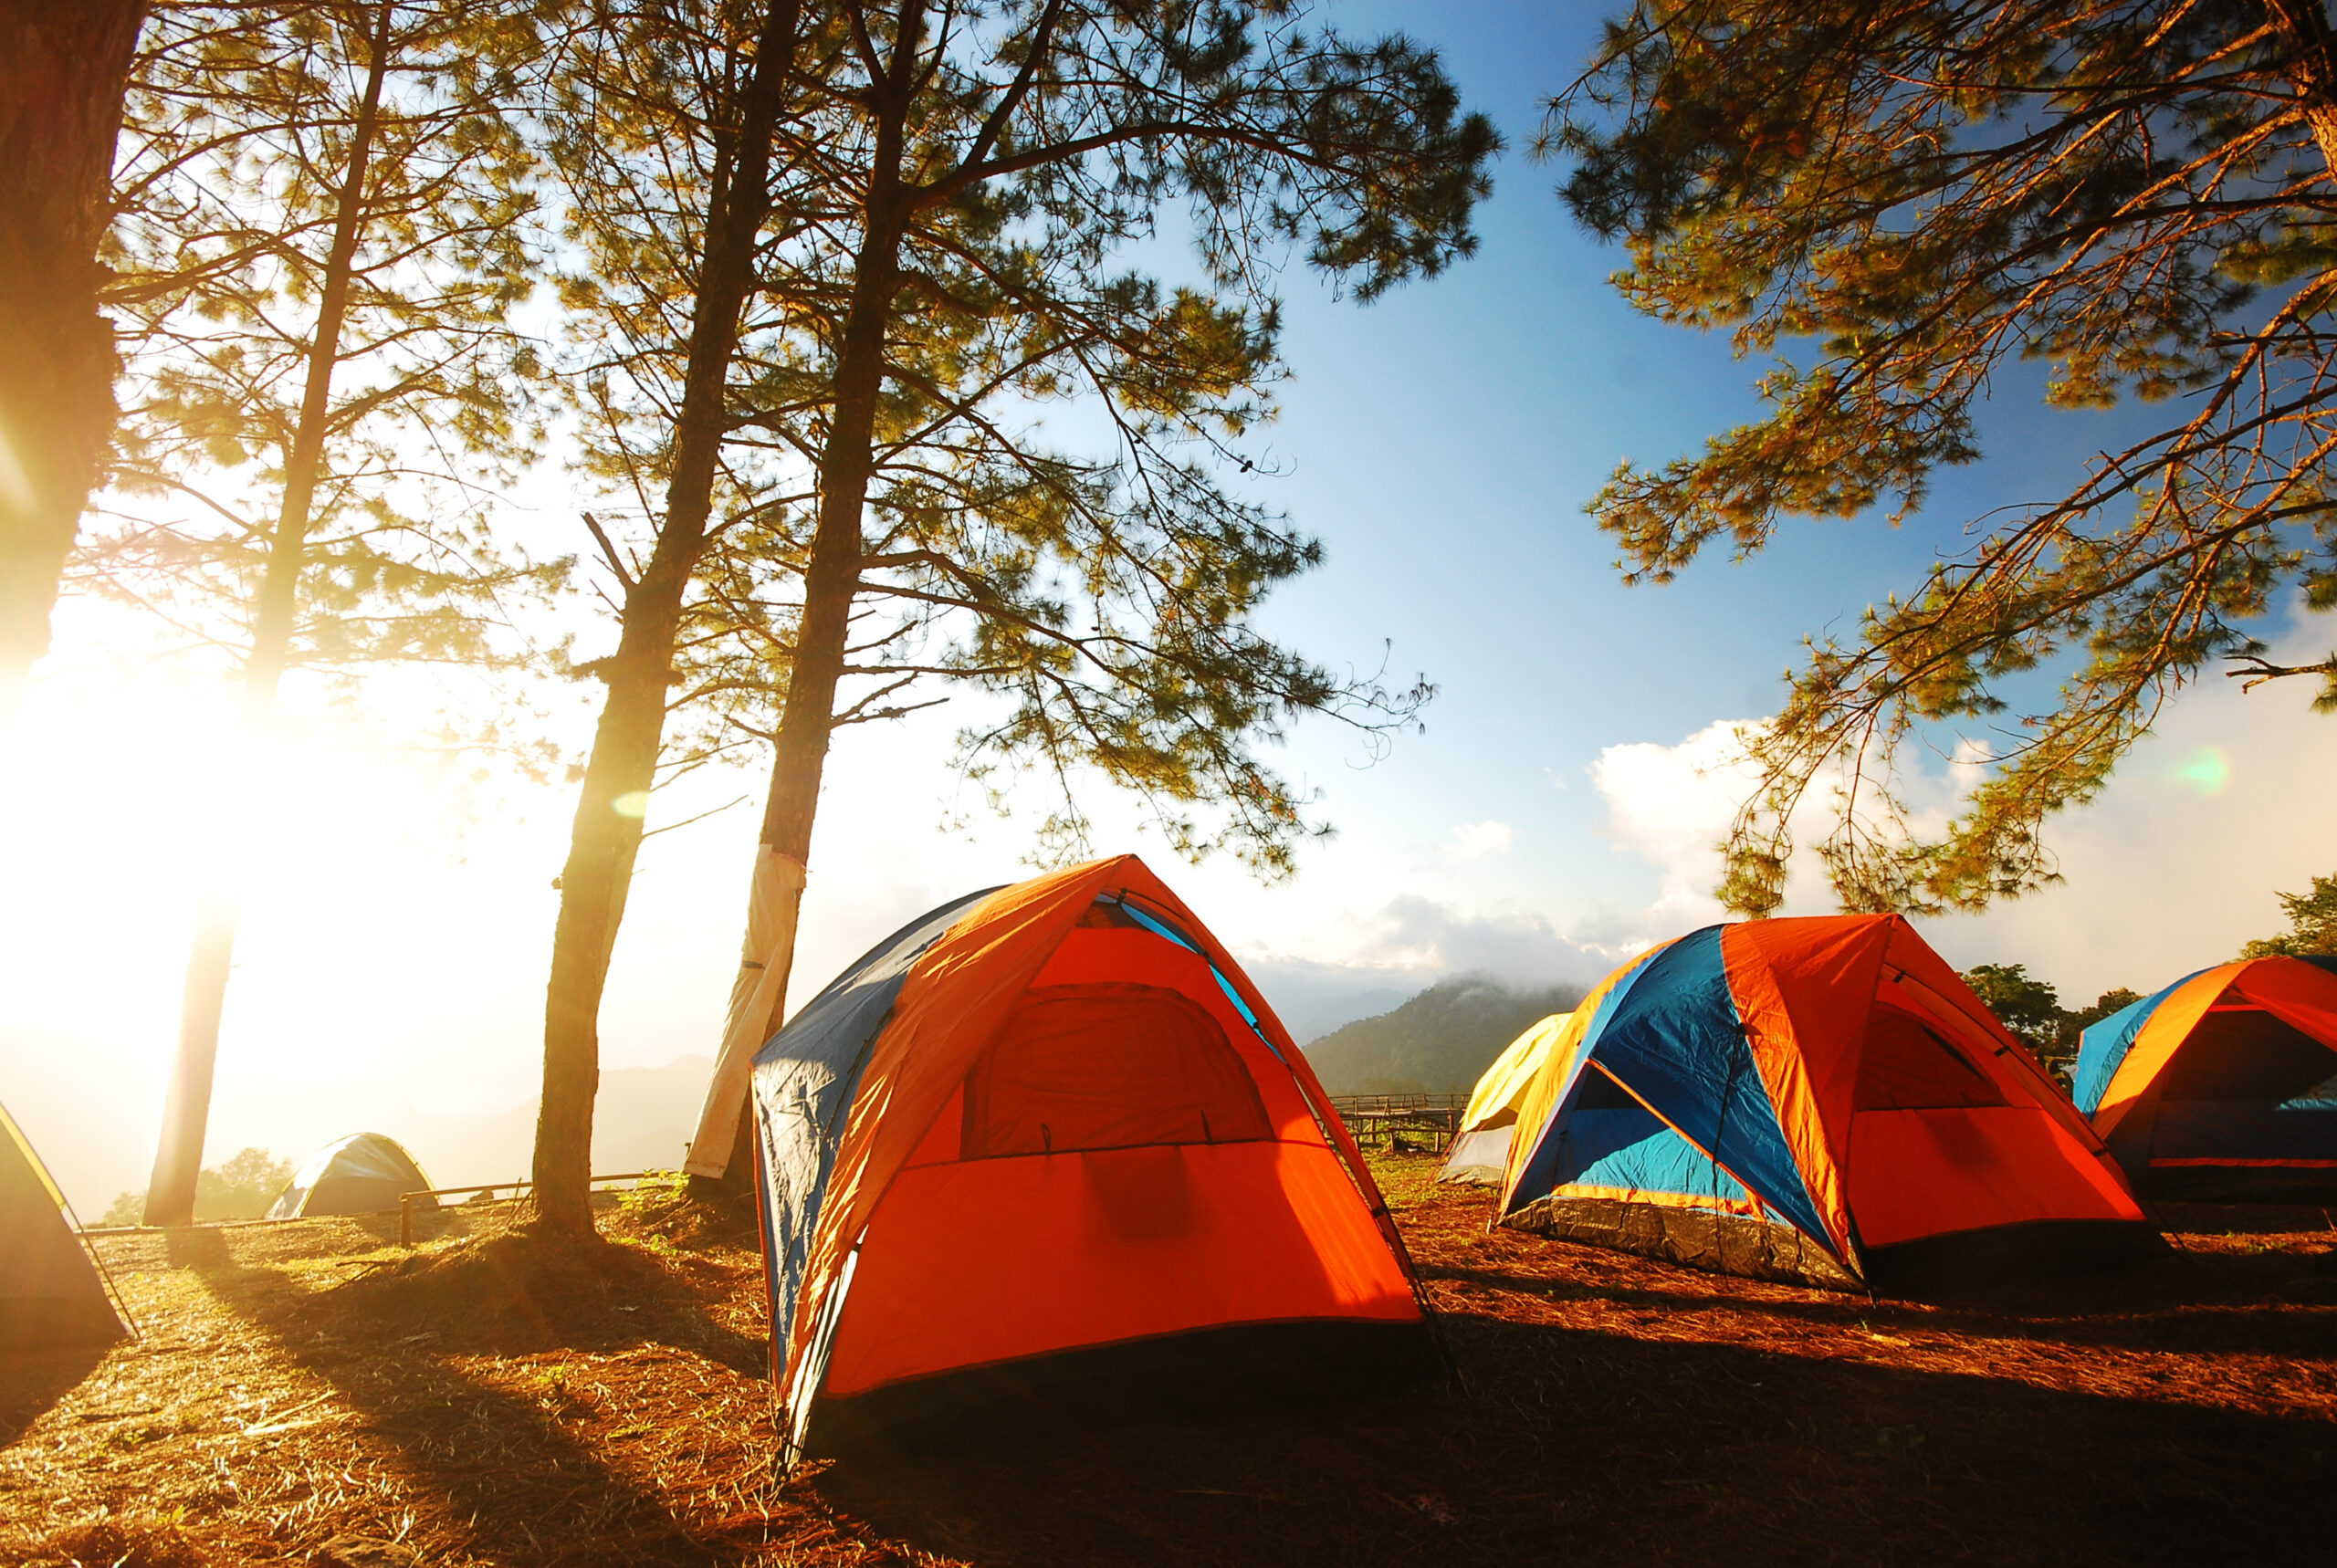 group of colorful tents at a campsite